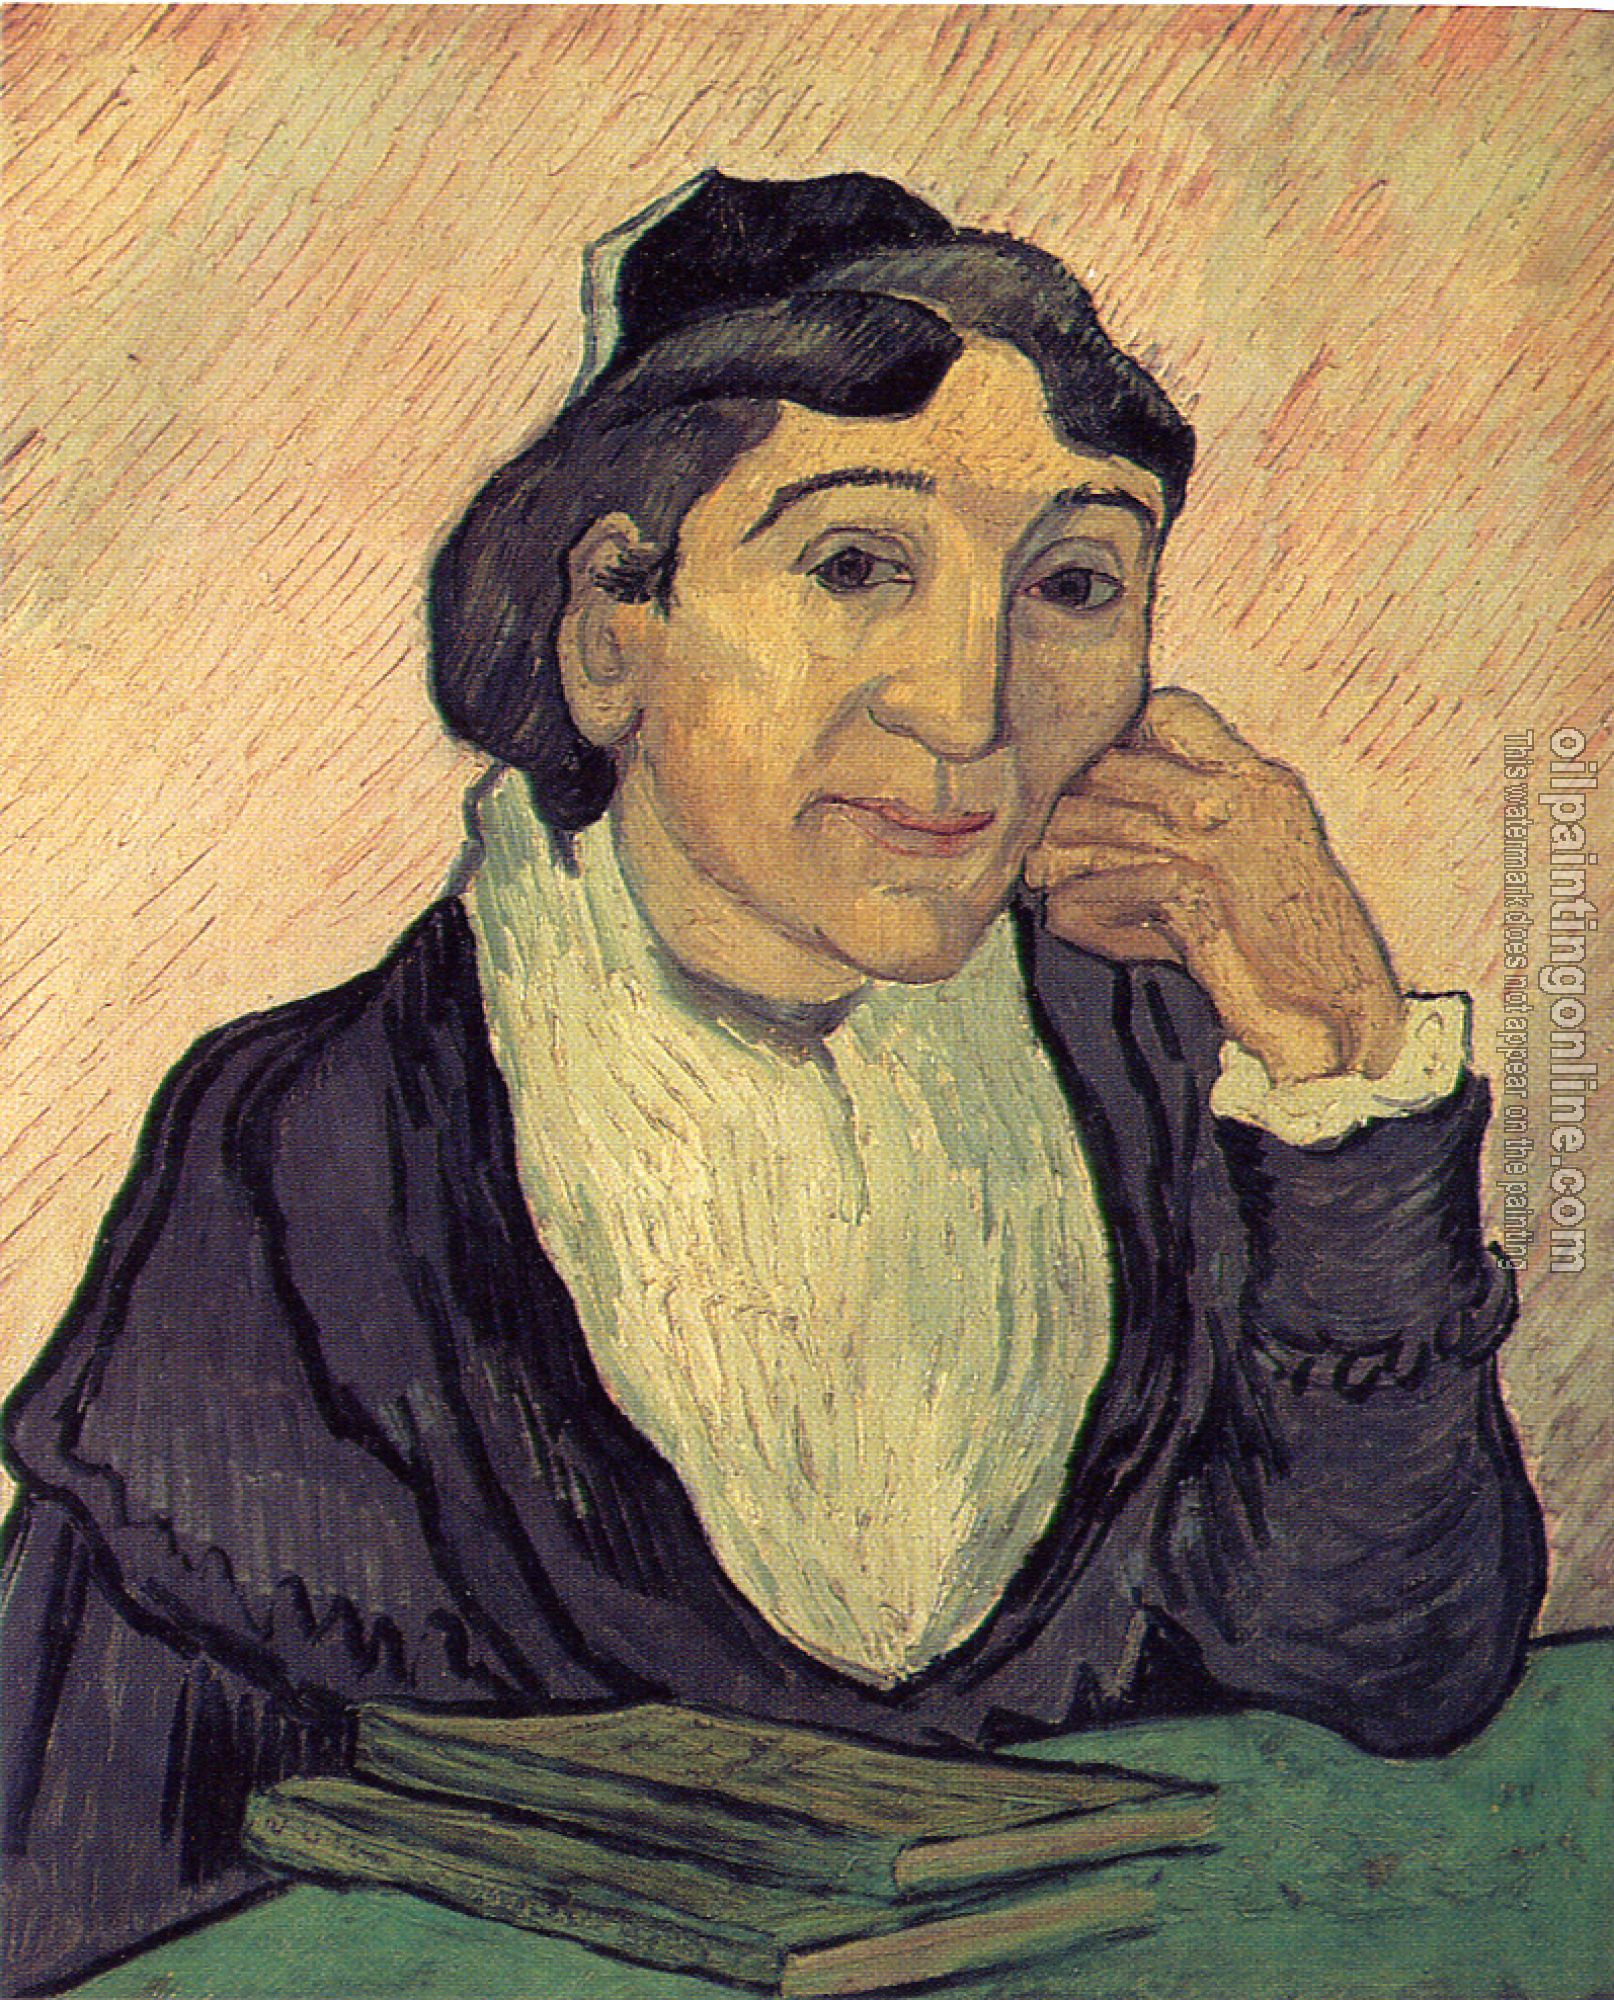 Gogh, Vincent van - The Arlesienne(Madame Ginoux), with Cherrg Colored Background